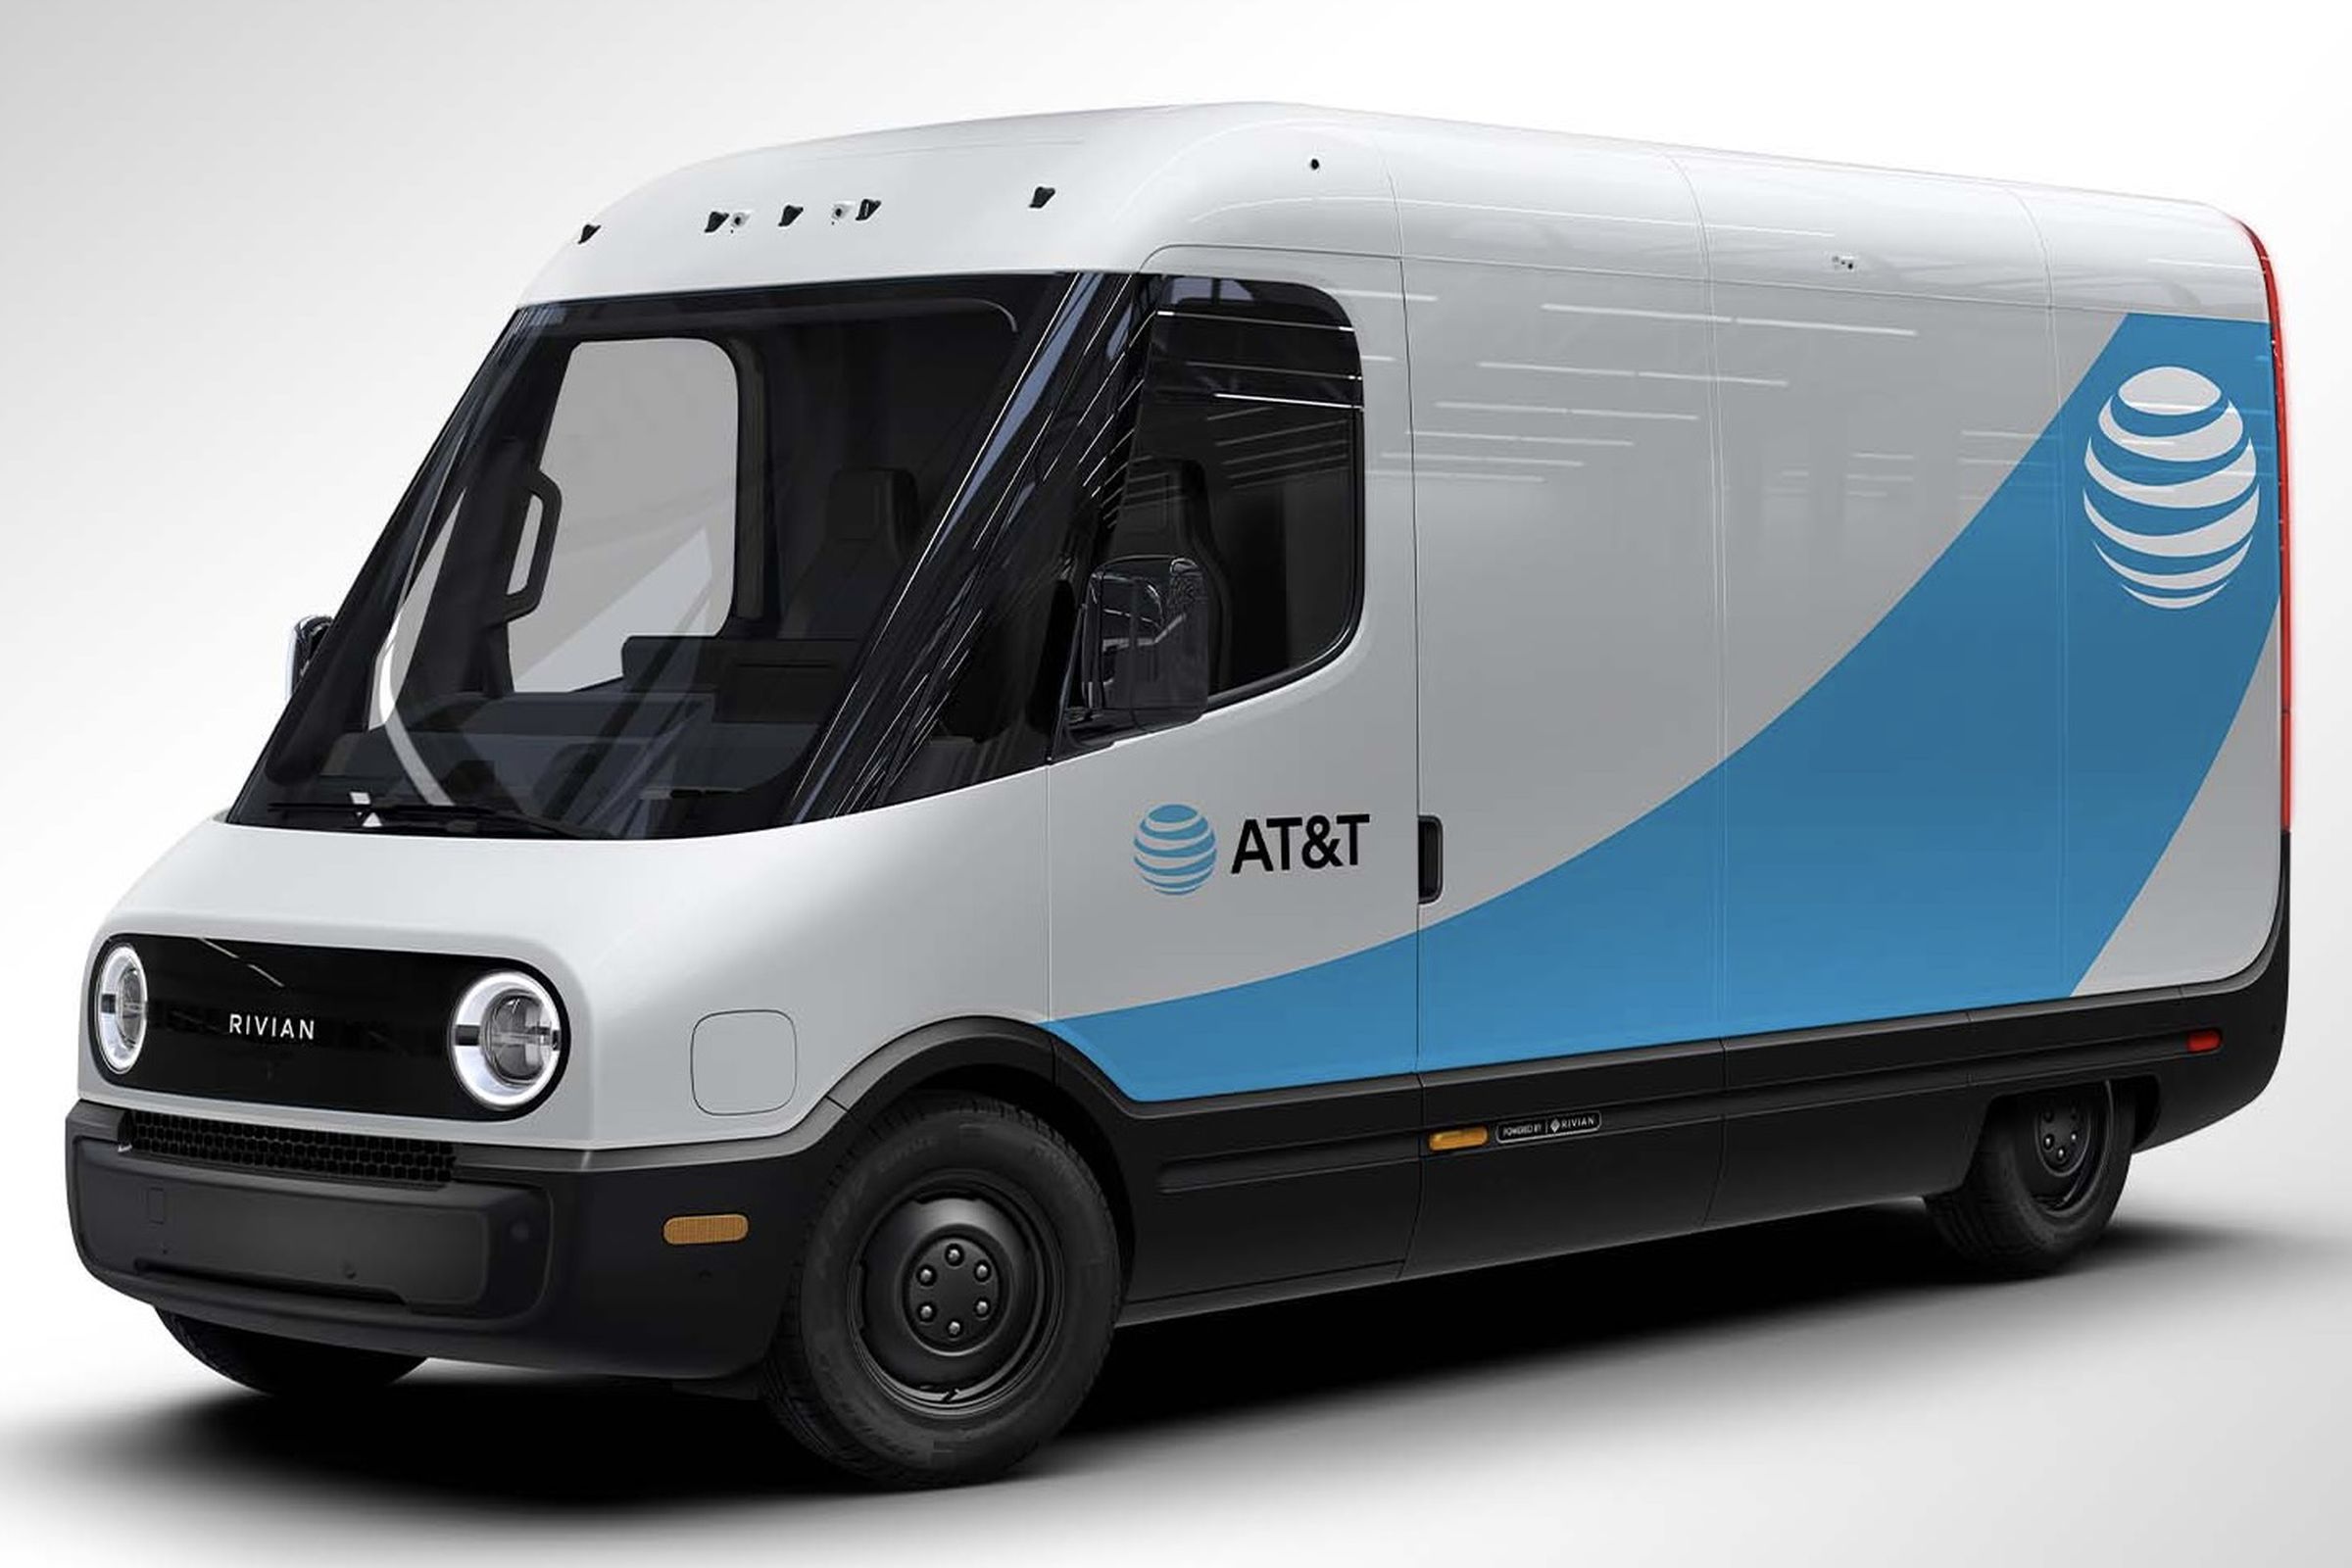 Rivian commercial van with AT&amp;T logo on side